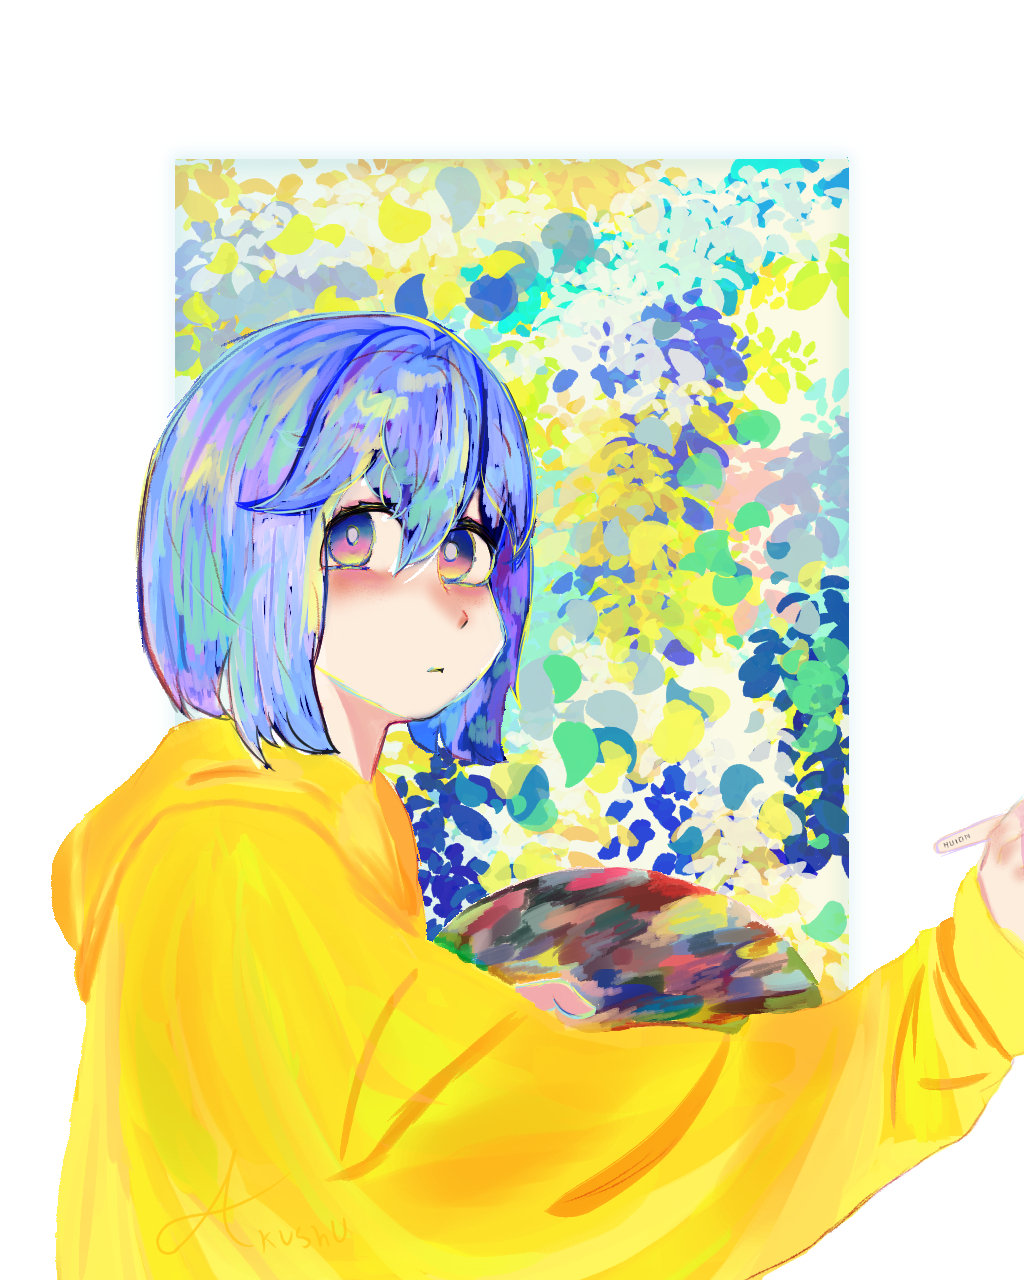 Anime Anime Girls Artwork Painting Women 2D Drawing Blue Yellow Canvas Vertical 1024x1280